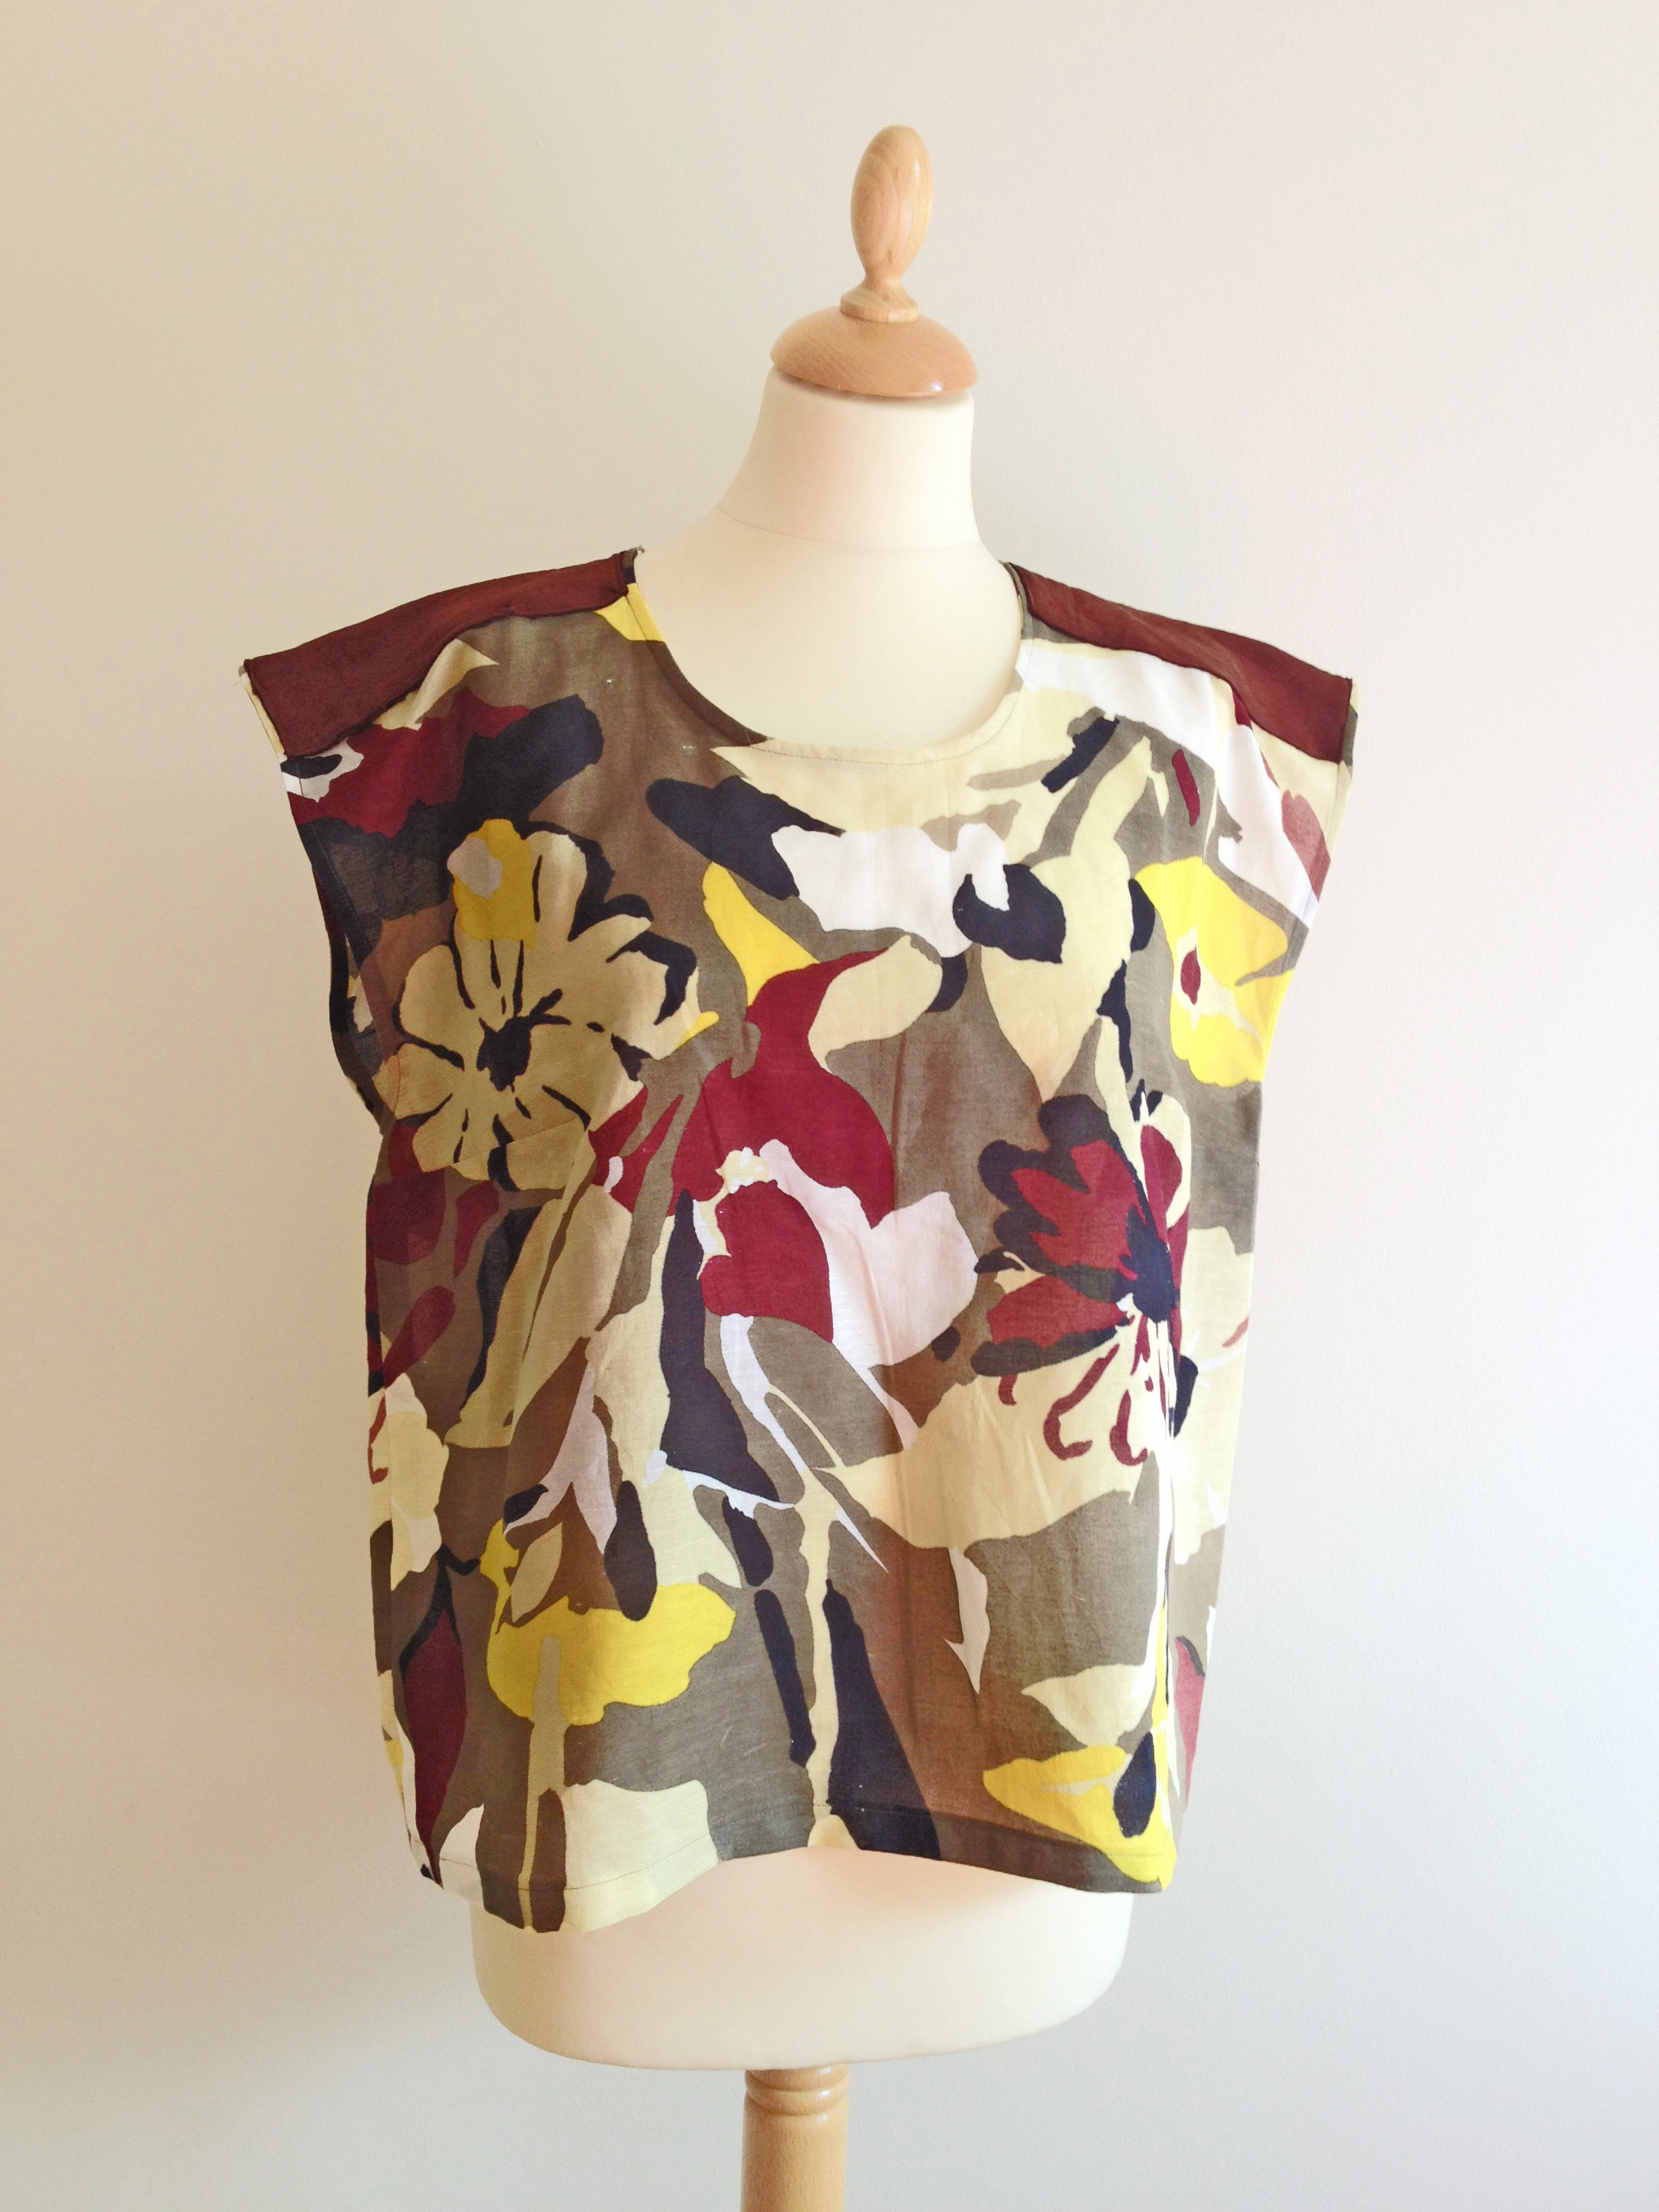  Military floral top by Opian